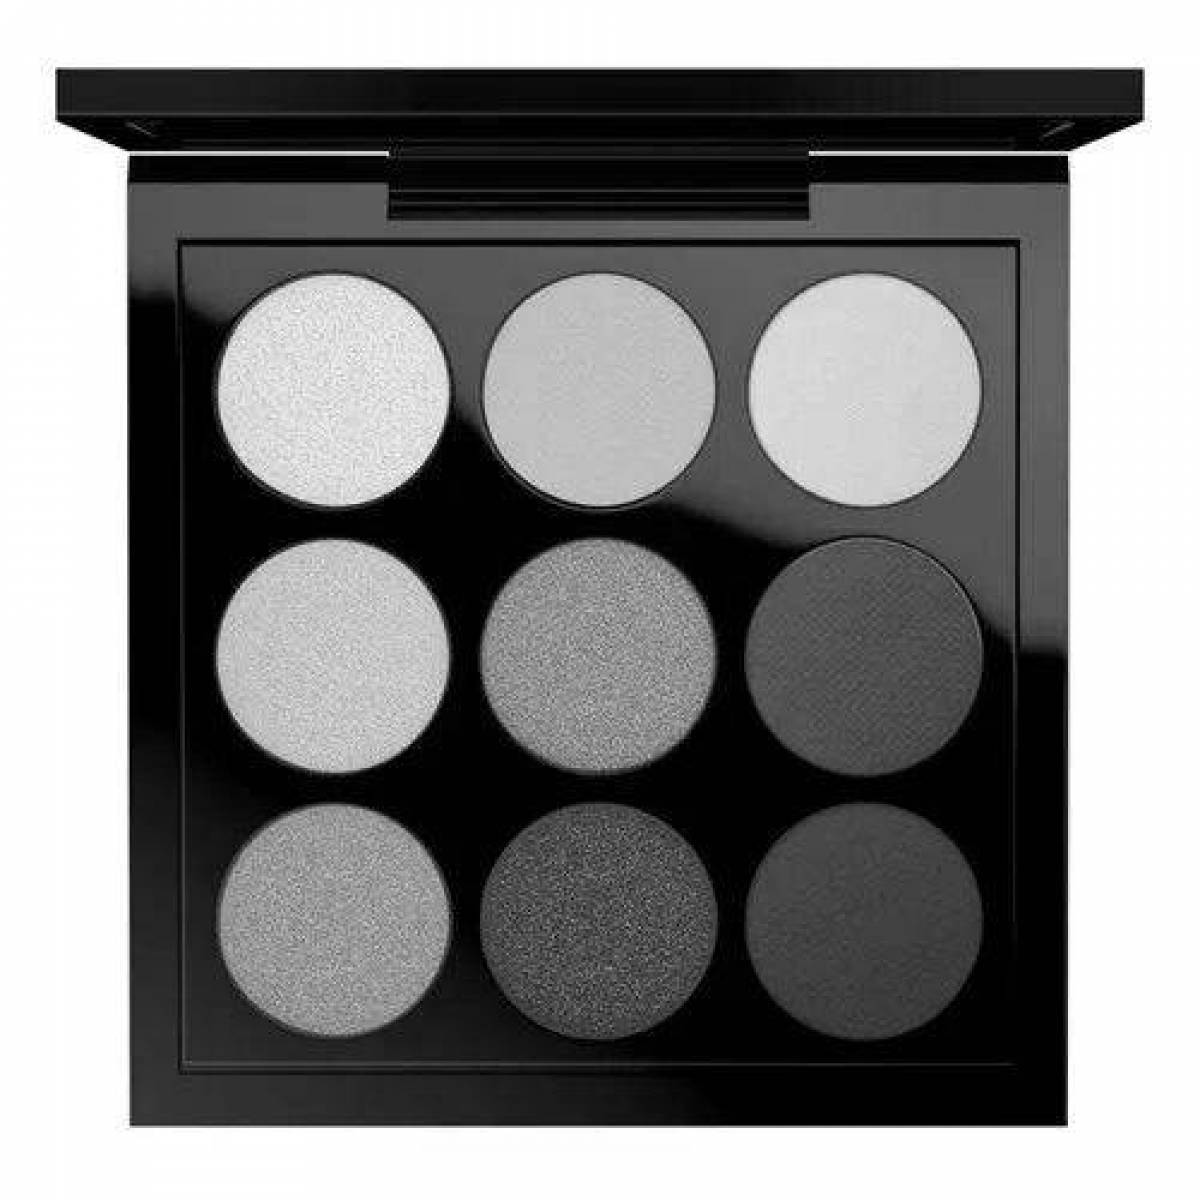 Attractive eyeshadow palette 9 colors